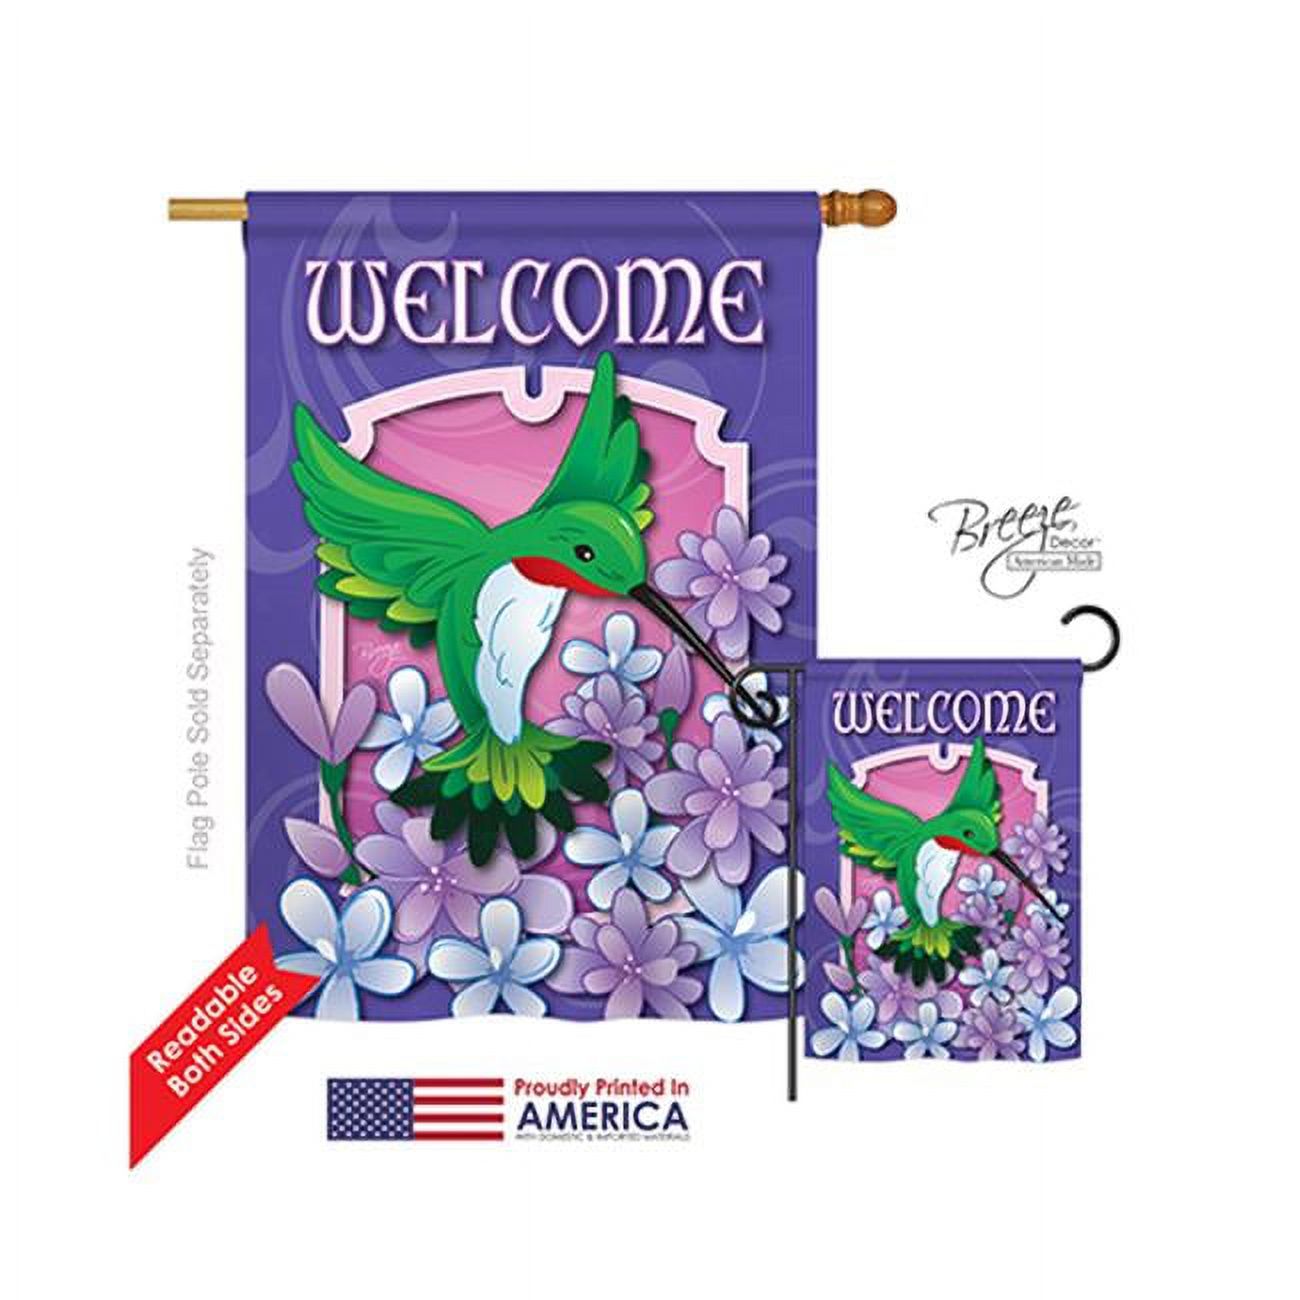 Breeze Decor 05033 Birds Welcome Hummingbird 2-Sided Vertical Impression House Flag - 28 x 40 in. - image 1 of 2